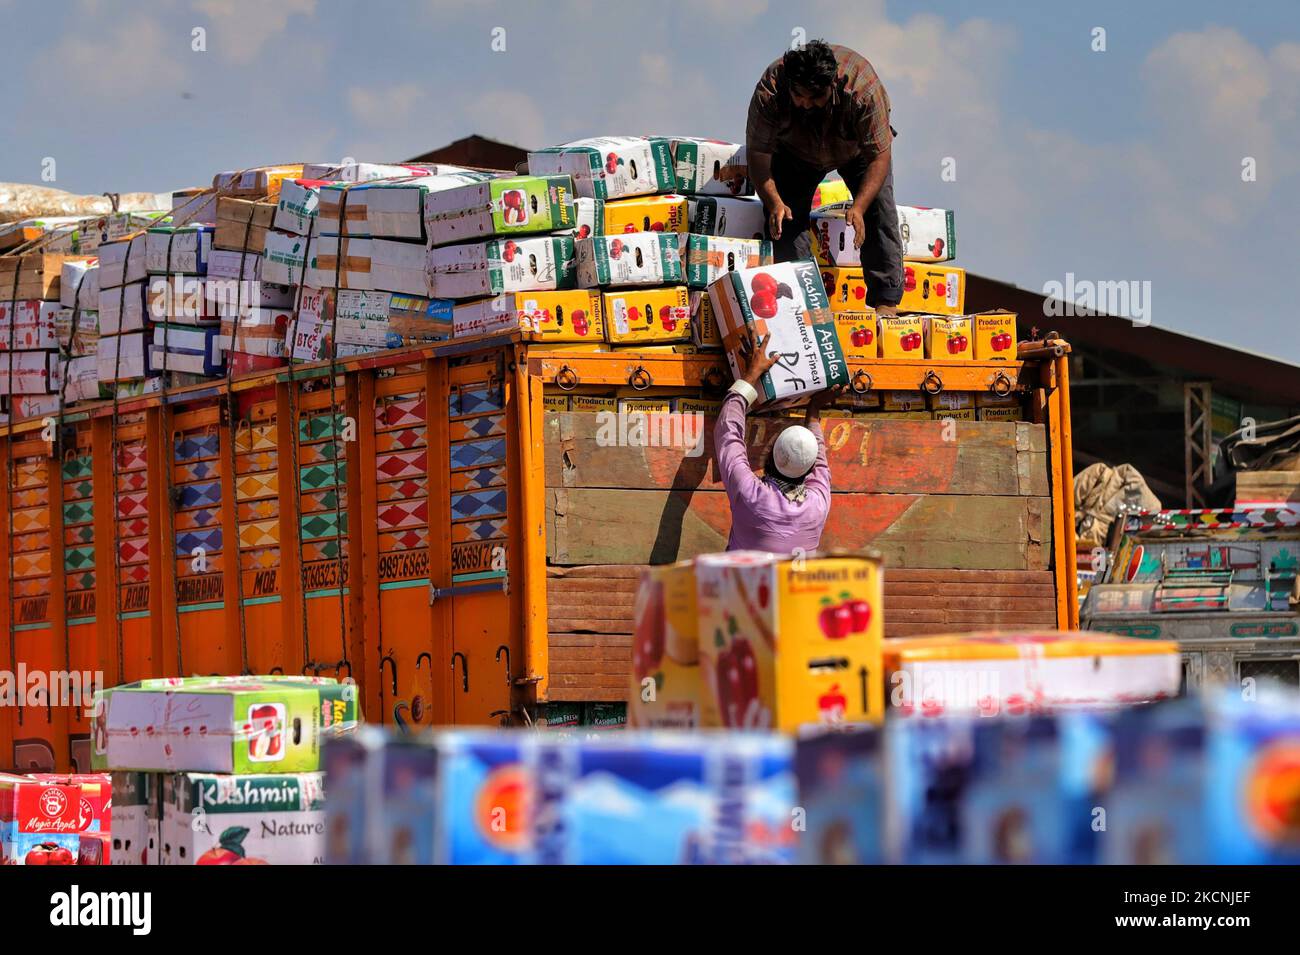 Kashmiri labourers carry boxes of Apples to be loaded onto trucks at a wholesale fruit market in Sopore, District baramulla, Jammu and Kashmir, India, some 54kms north of Srinagar, on 28 September 2021. Jammu & Kashmir boasts of around 80% share of total apple produced in the country.Â Apple cultivation and its value chain is one of the main stays of rural economy with revenue of around Rs. 1500 crores.Â The apple production is predominantly confined to districts of Srinagar, Ganderbal, Budgam, Baramulla, Kupwara, Anantnag and Shopian in Kashmir province. (Photo by Nasir Kachroo/NurPhoto) Stock Photo